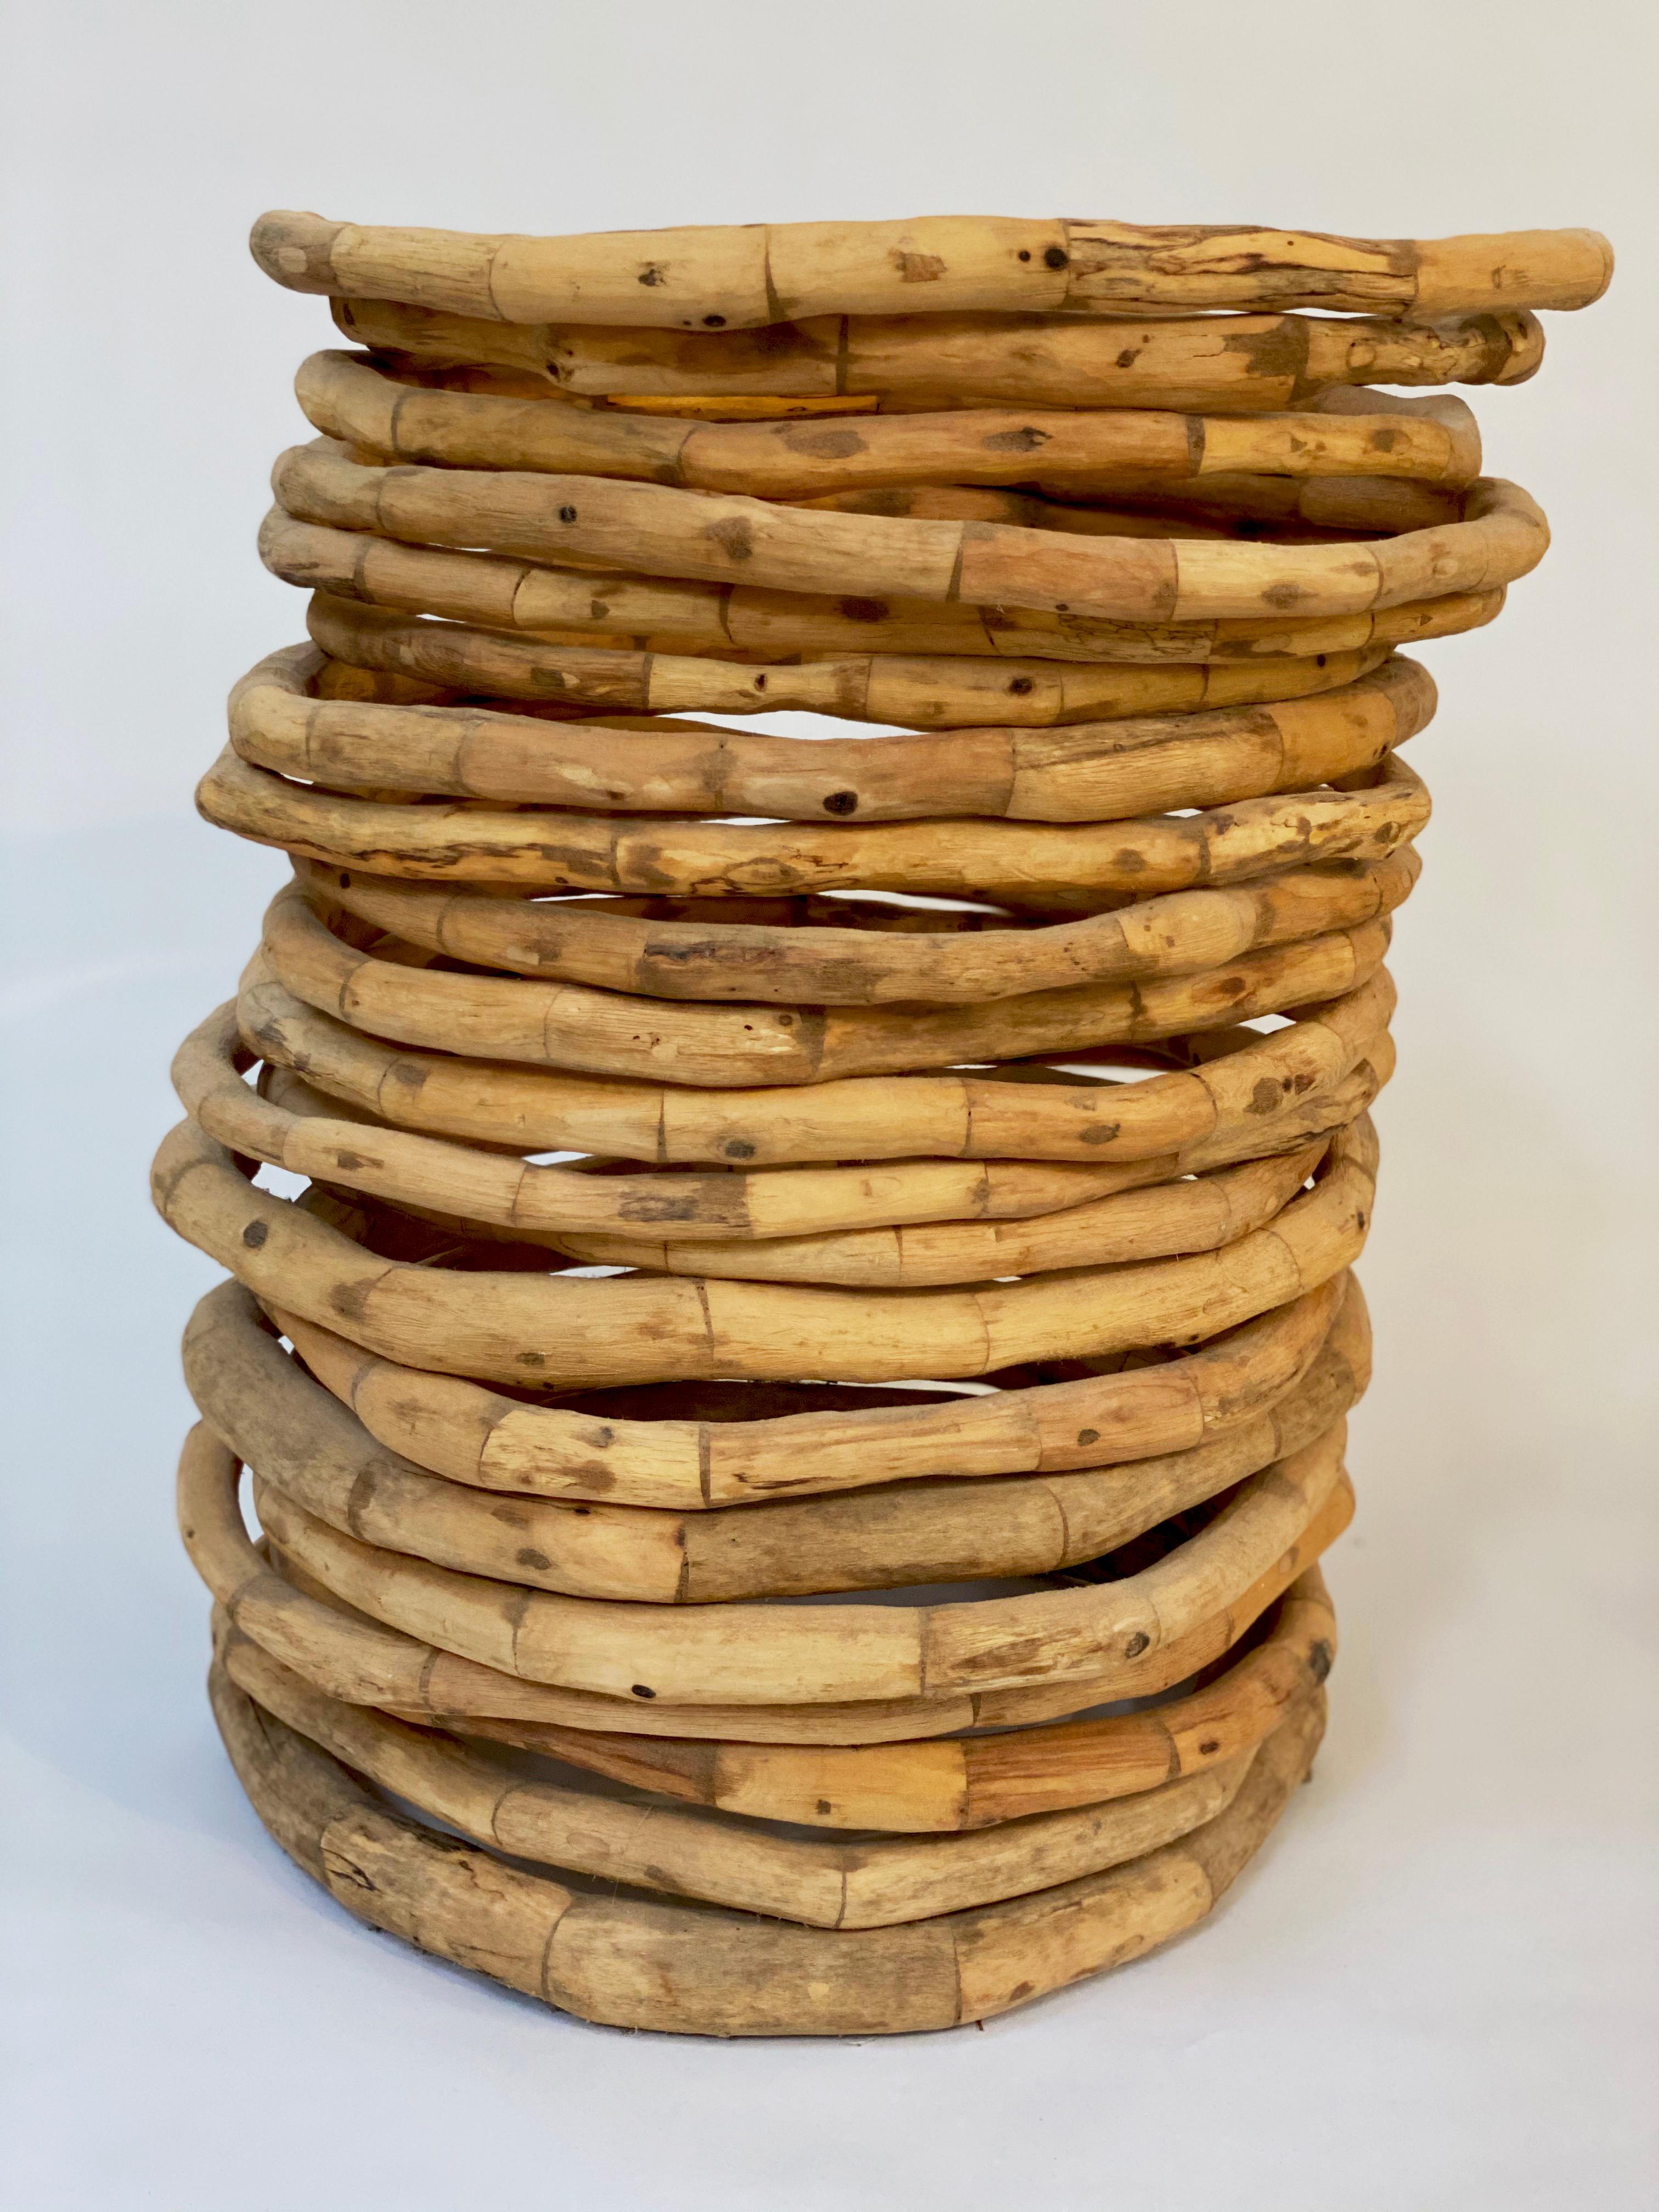 Wood Sculpture, 336 pieces, 21 rings/circles : 'Chlorophyll'